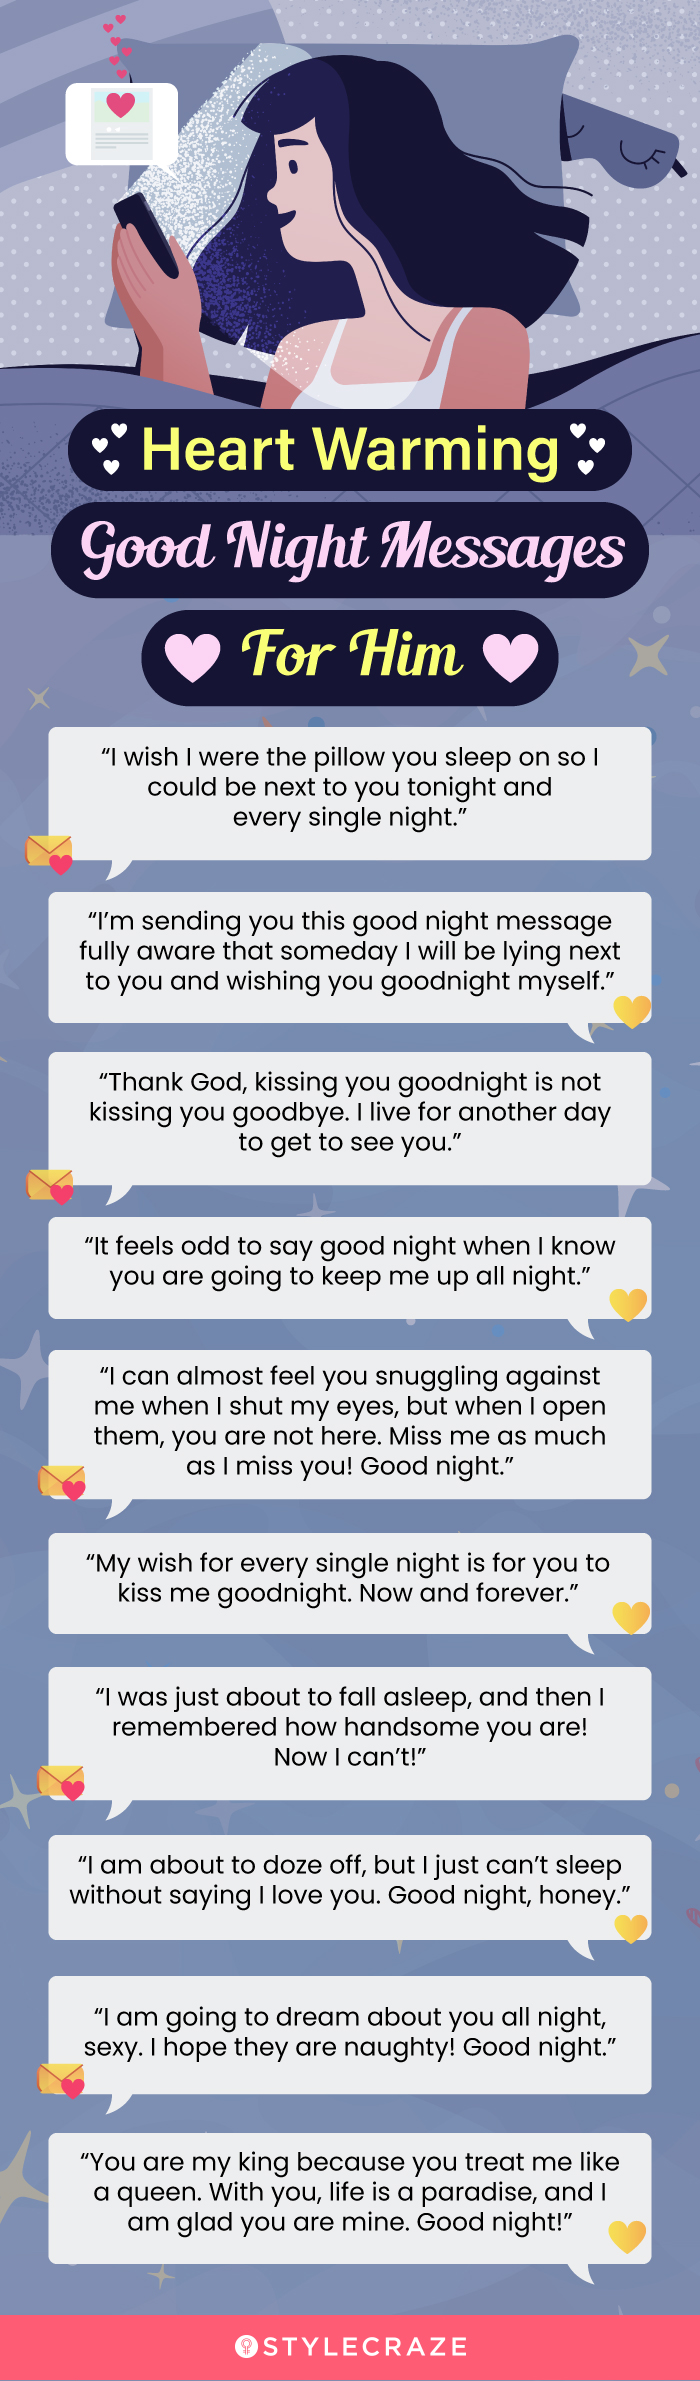 a heart warming good night messages for him (infographic)